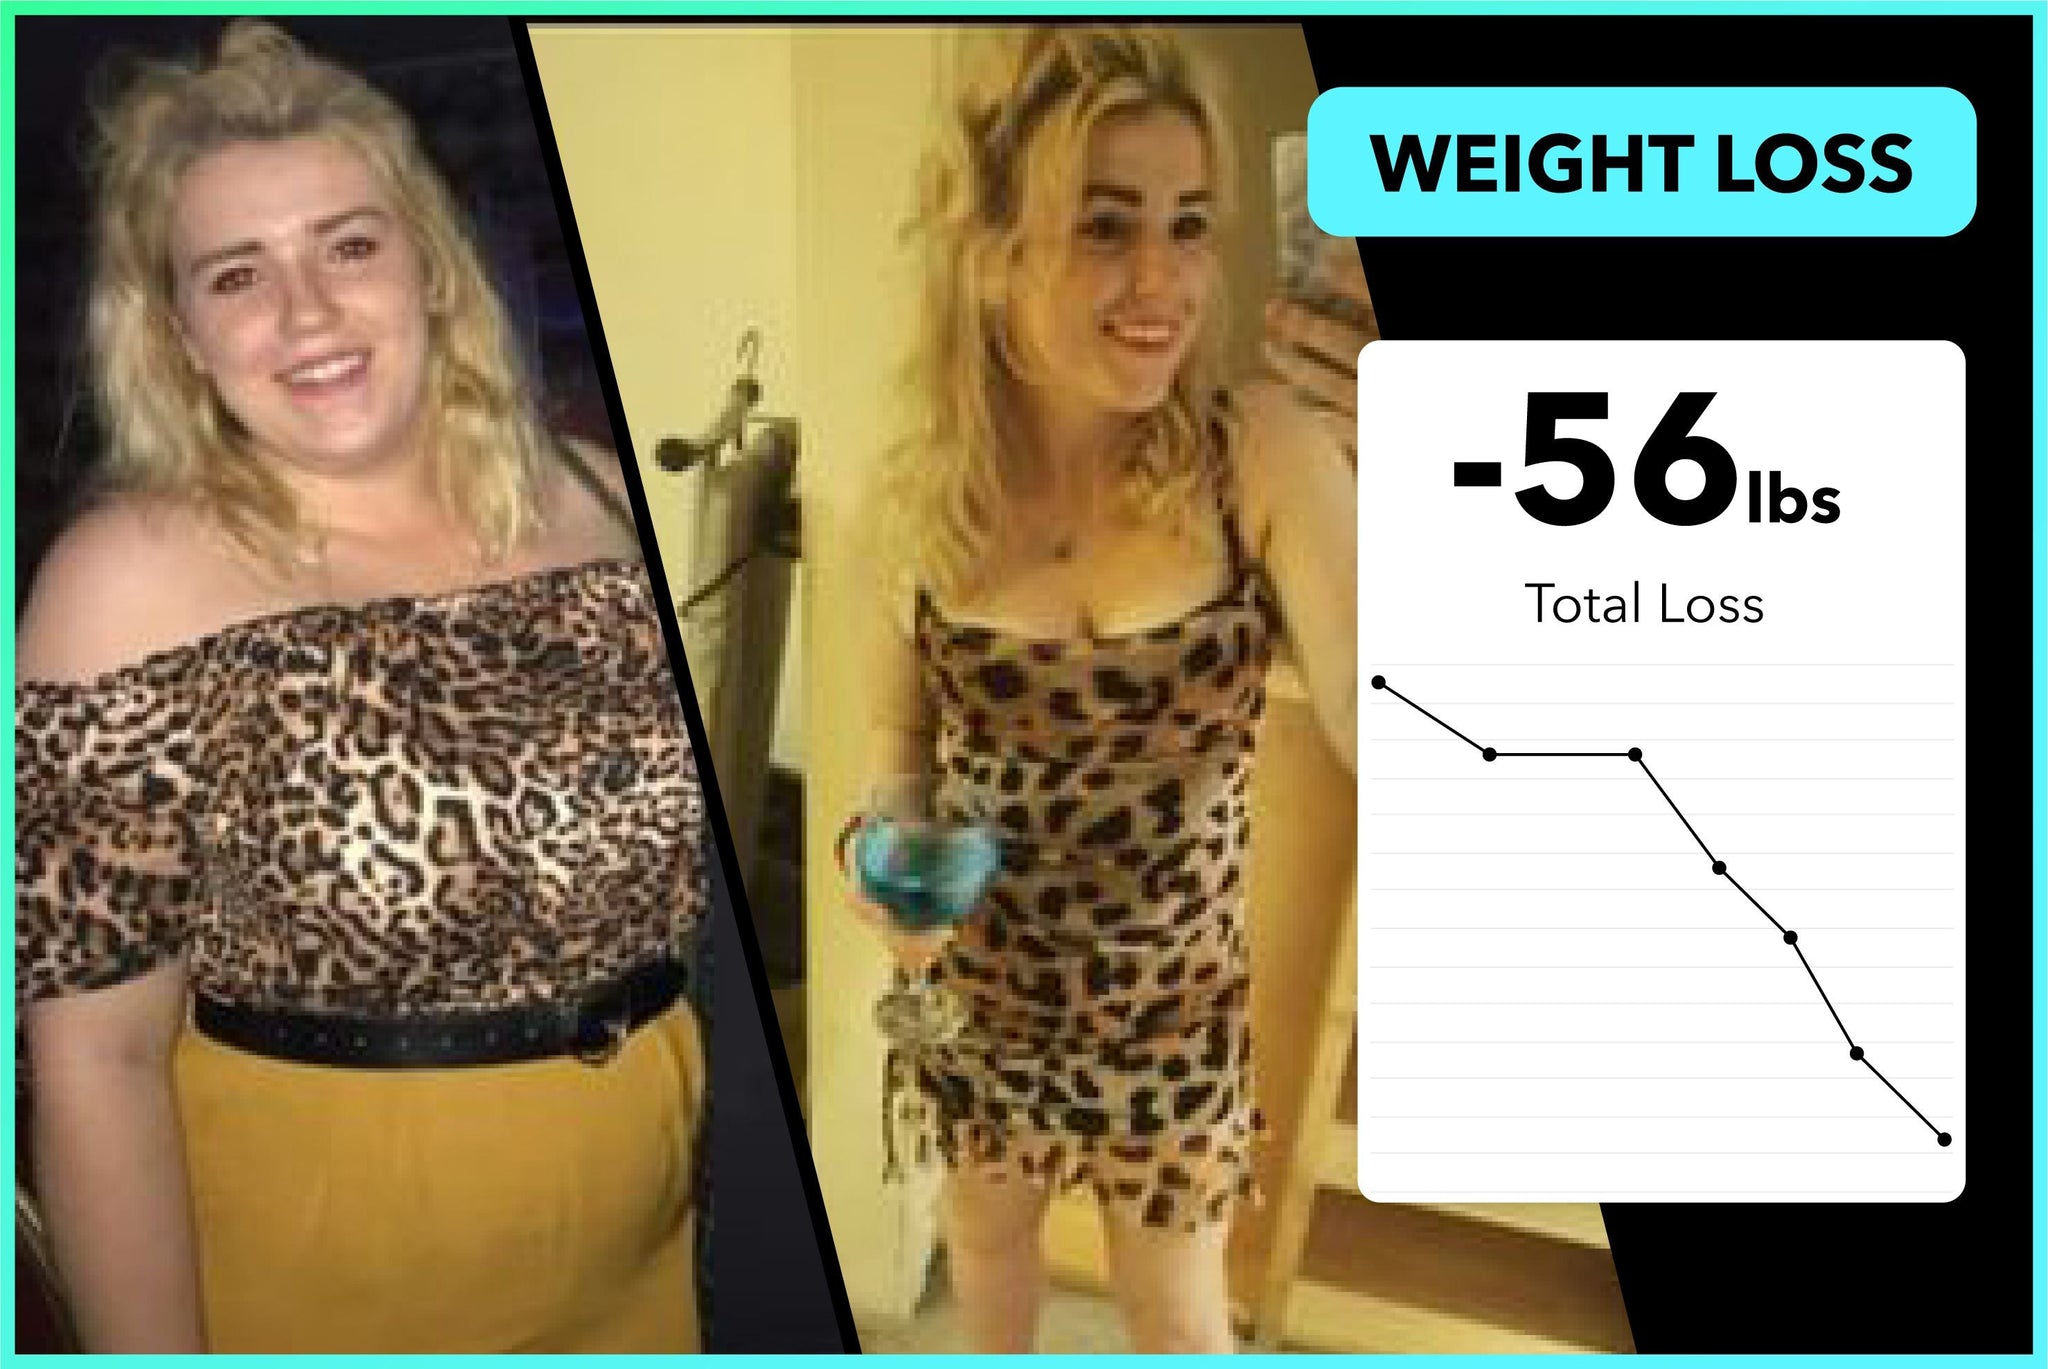 Devon lost an incredible 56lbs with Team RH